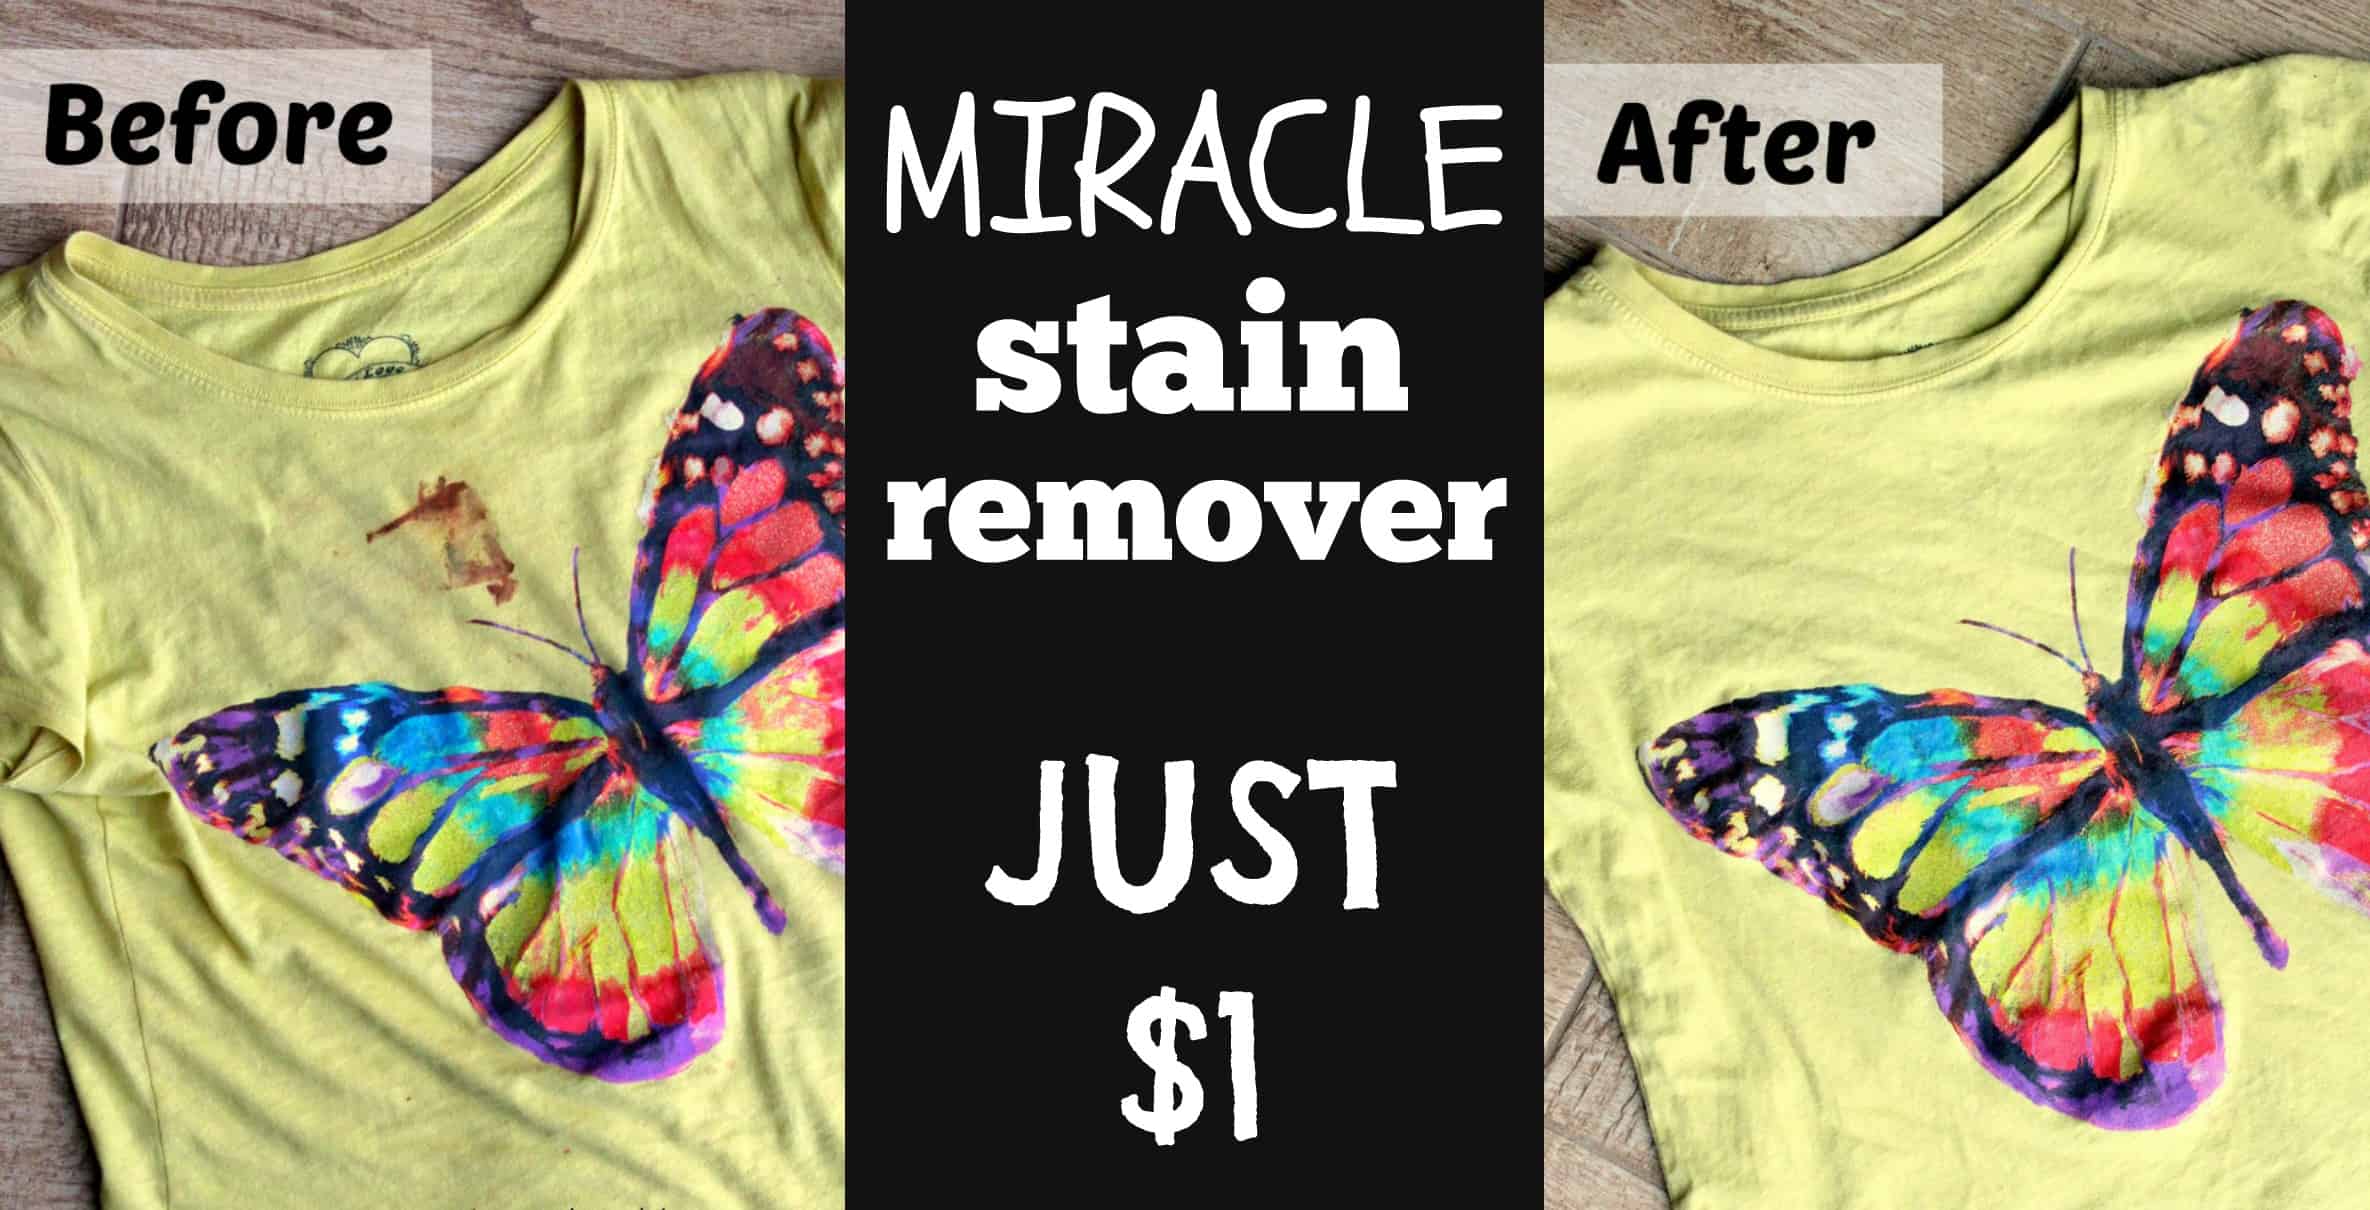 Got stains? This Miracle Stain Remover is the answer to your problems. At just $1.00, you will be amazed at what it can do for you!